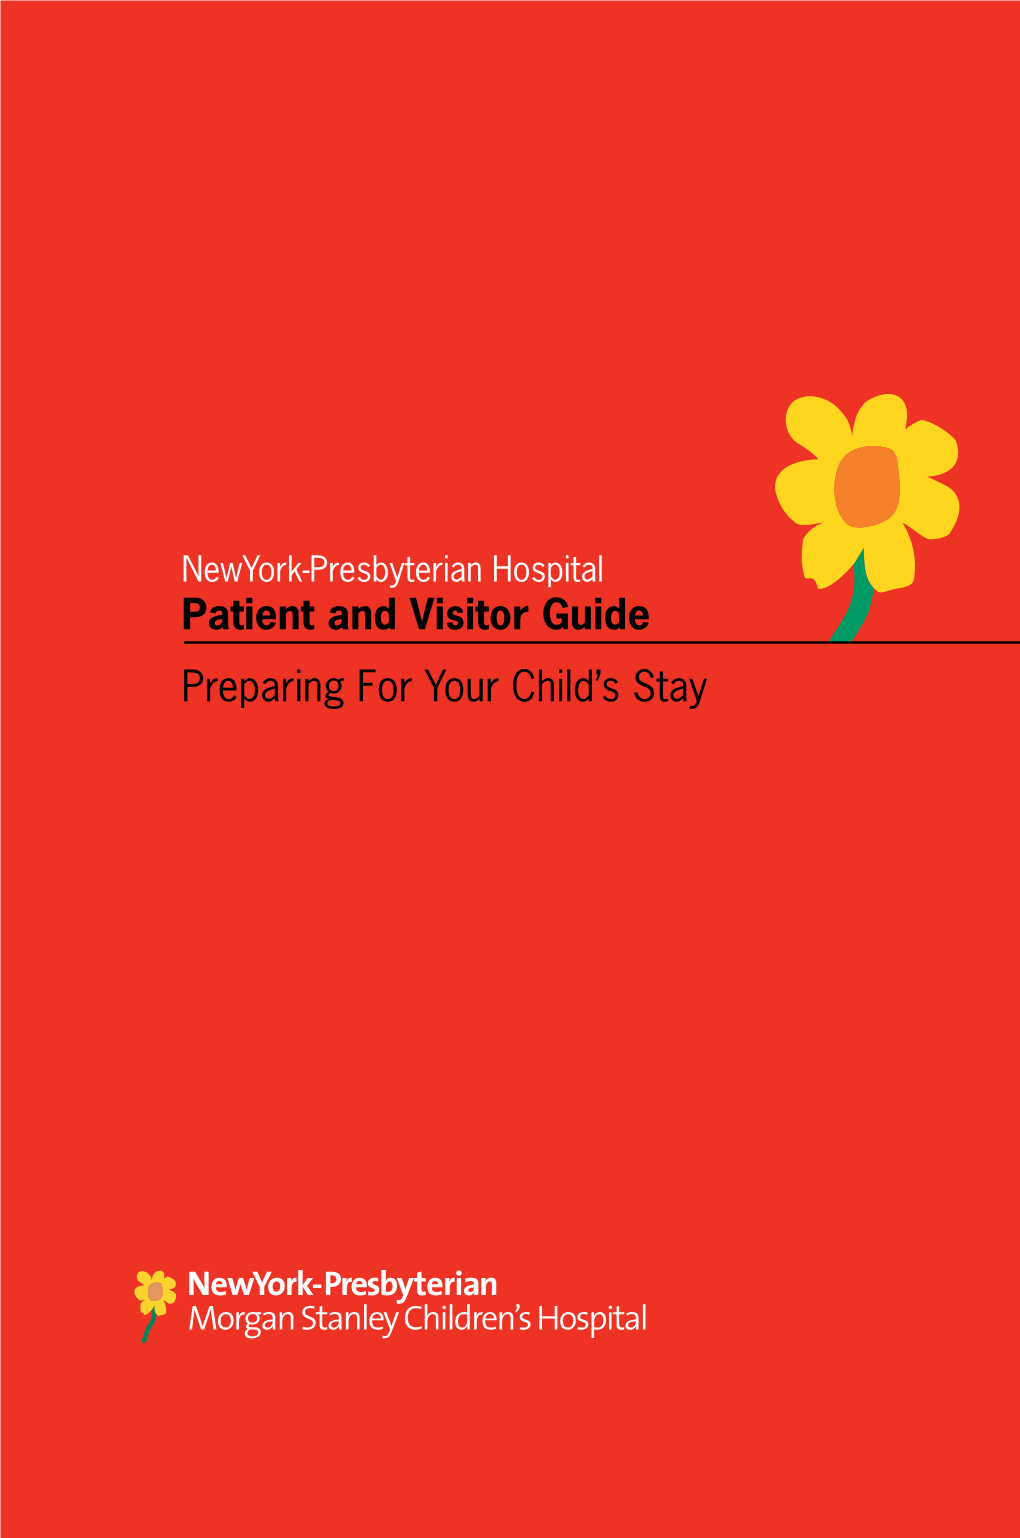 Patient and Visitor Guide Preparing for Your Child's Stay